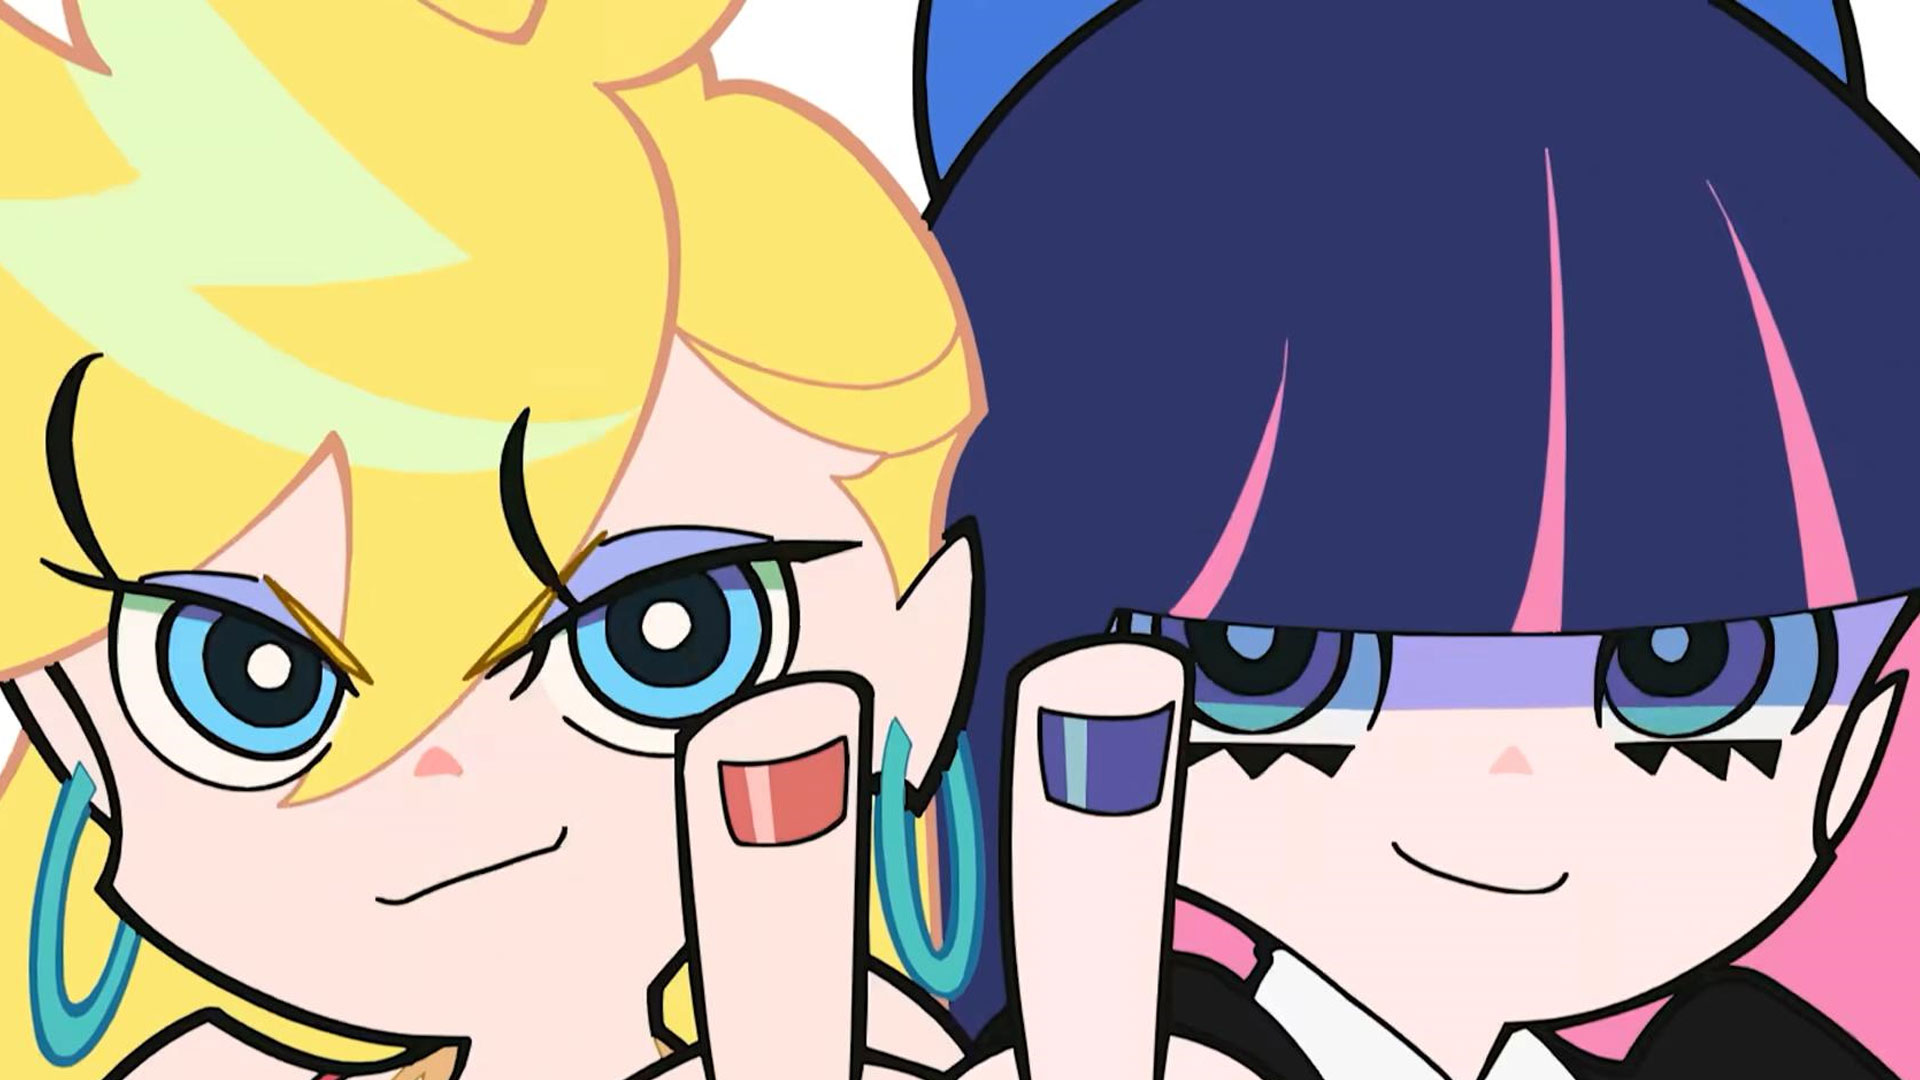 What is Already Known About Panty & Stocking With Garterbelt Season 2?